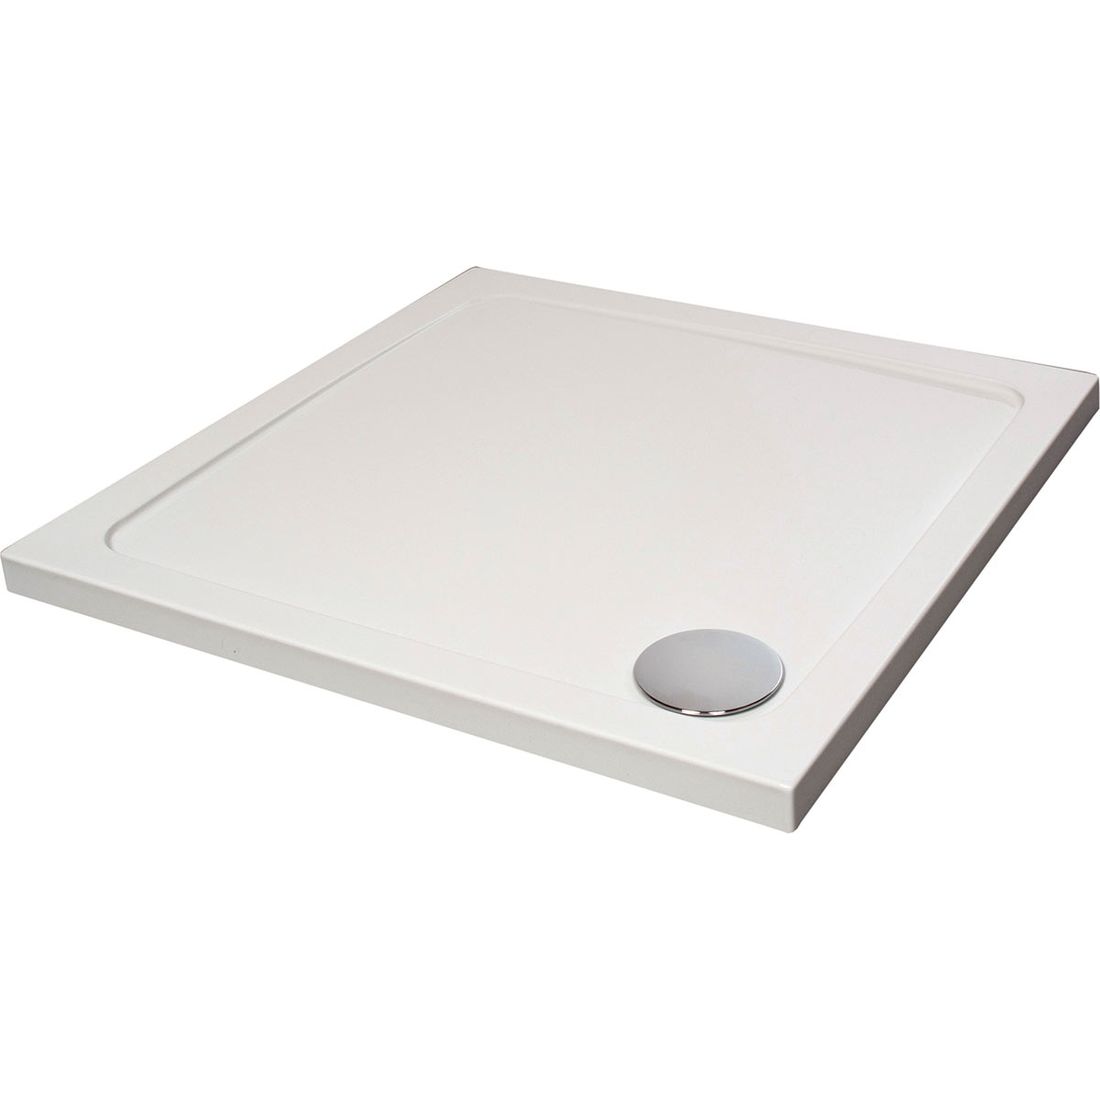 Shower Tray 760 X 760Mm Low Profile Abs White